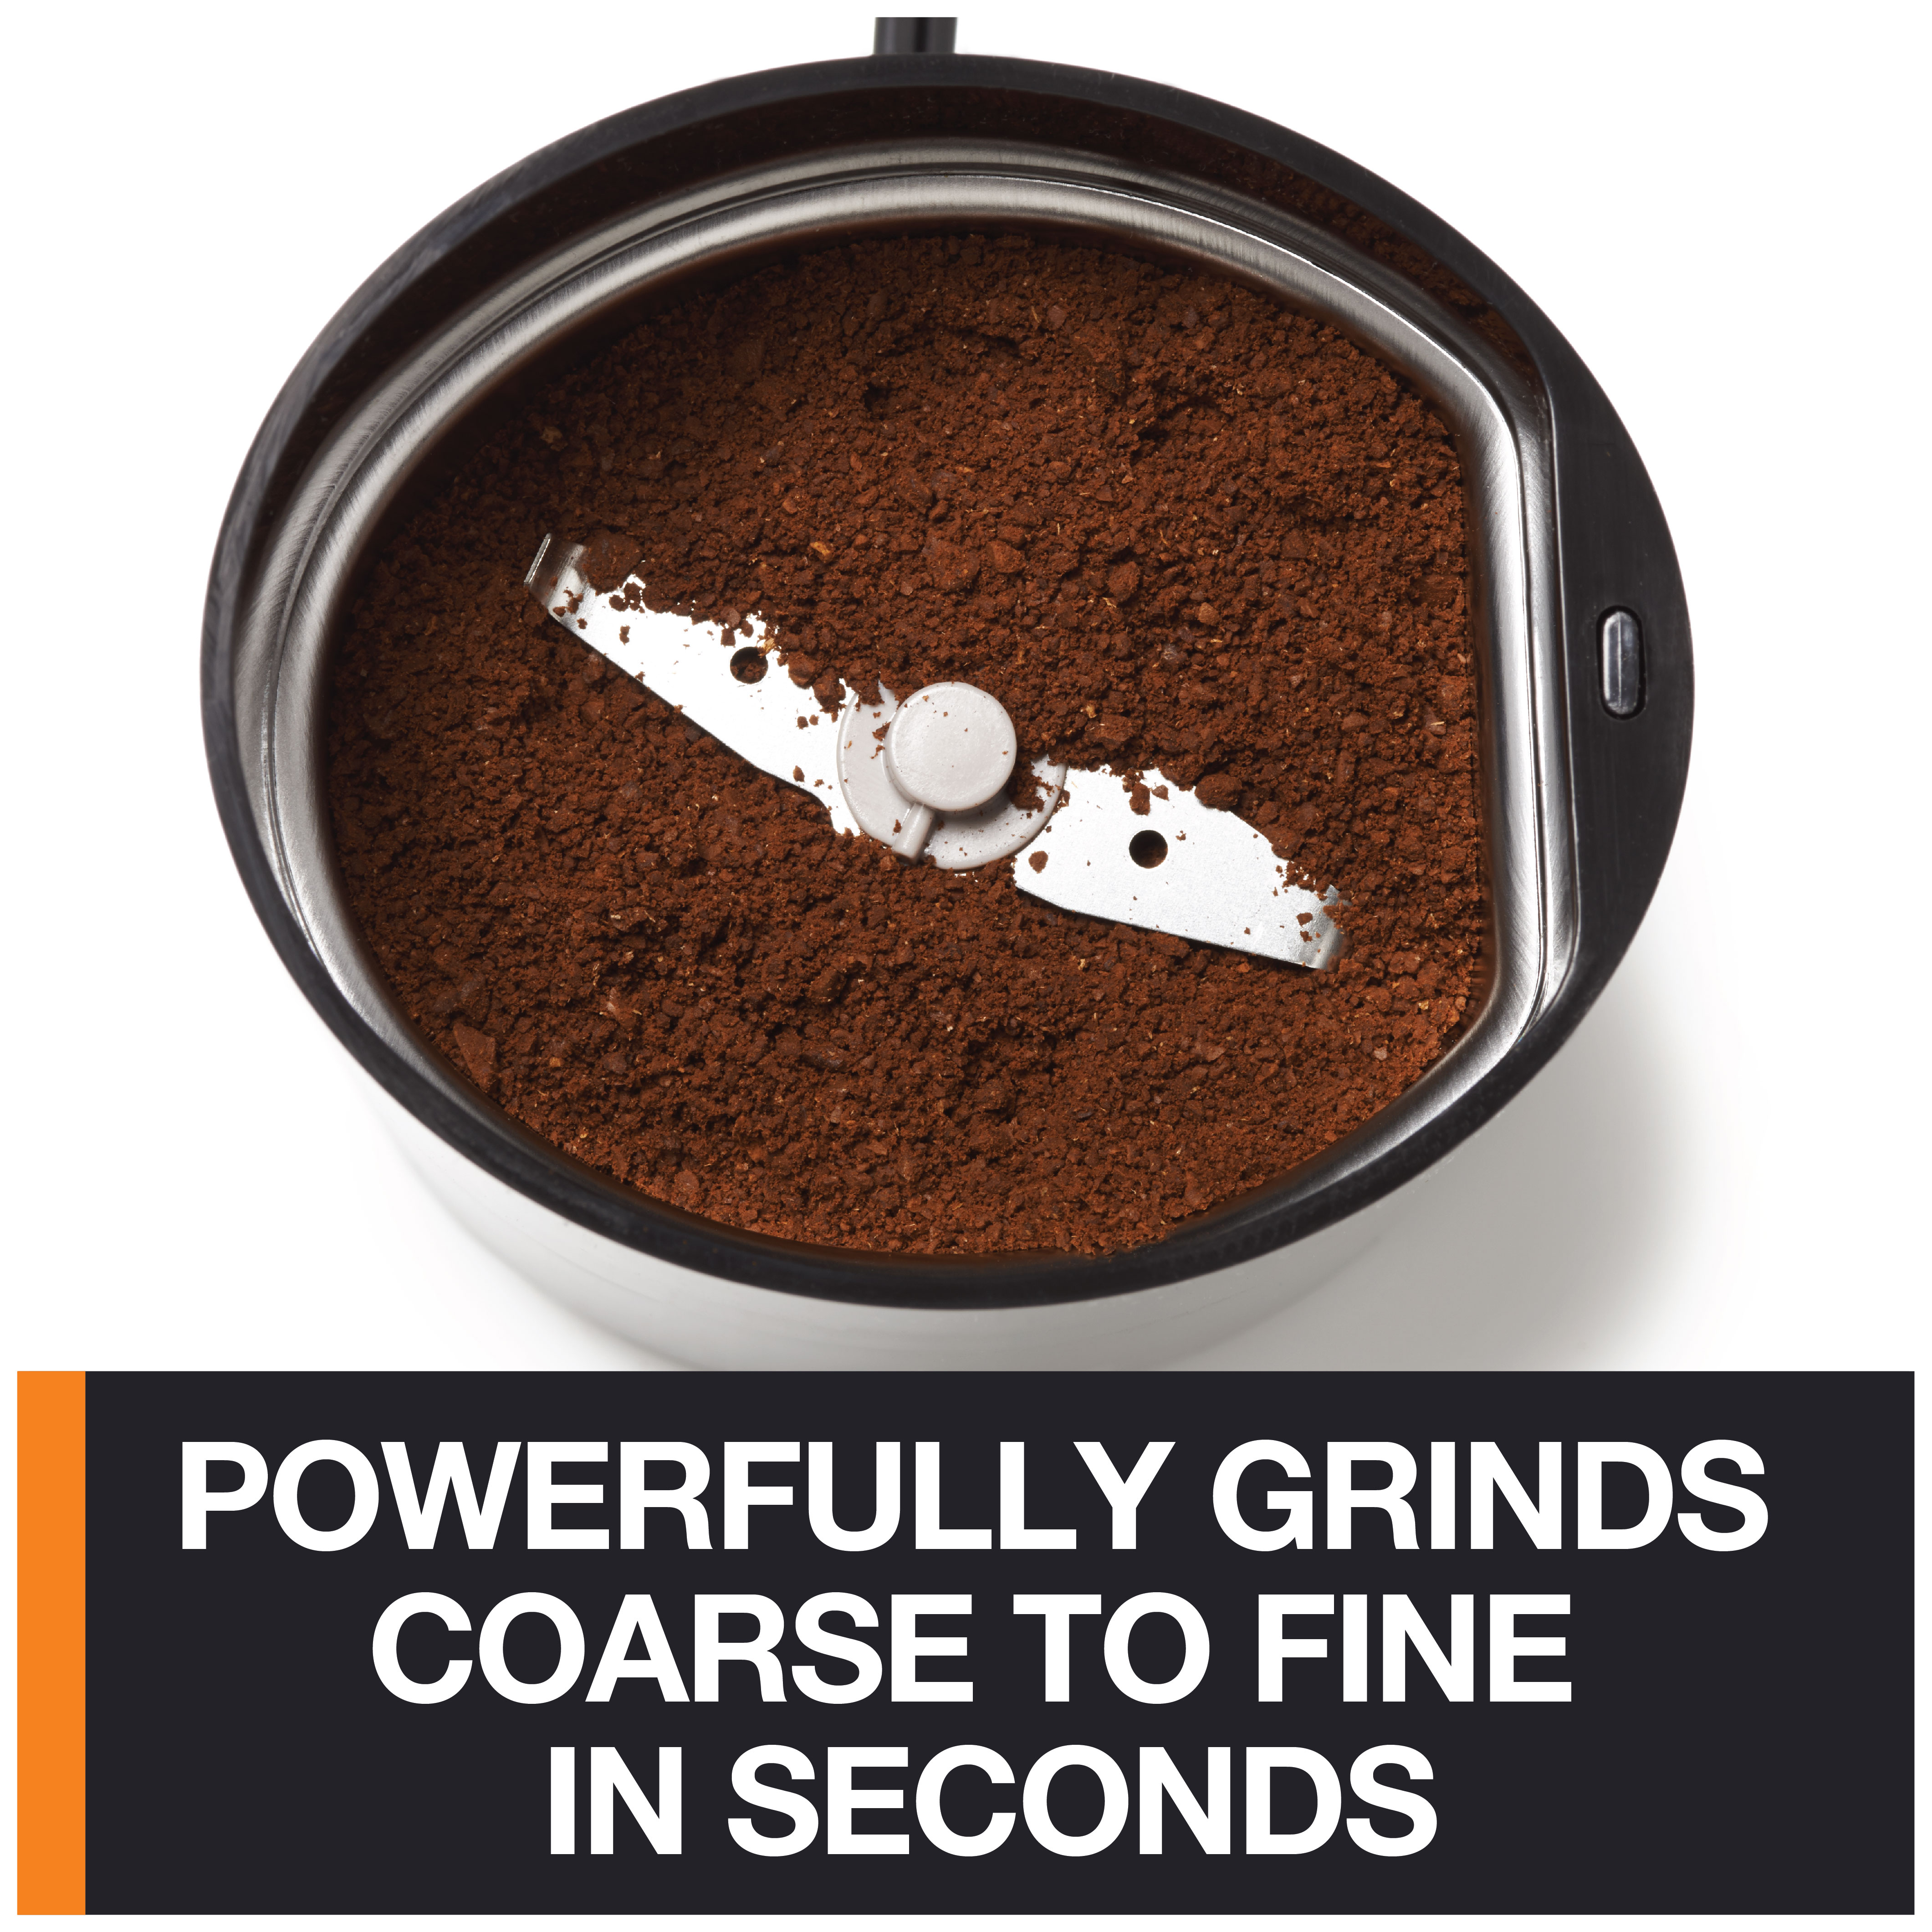 KRUPS New Fast Touch Electric Coffee and Spice Grinder with Stainless Steel Blades, Black - image 5 of 7